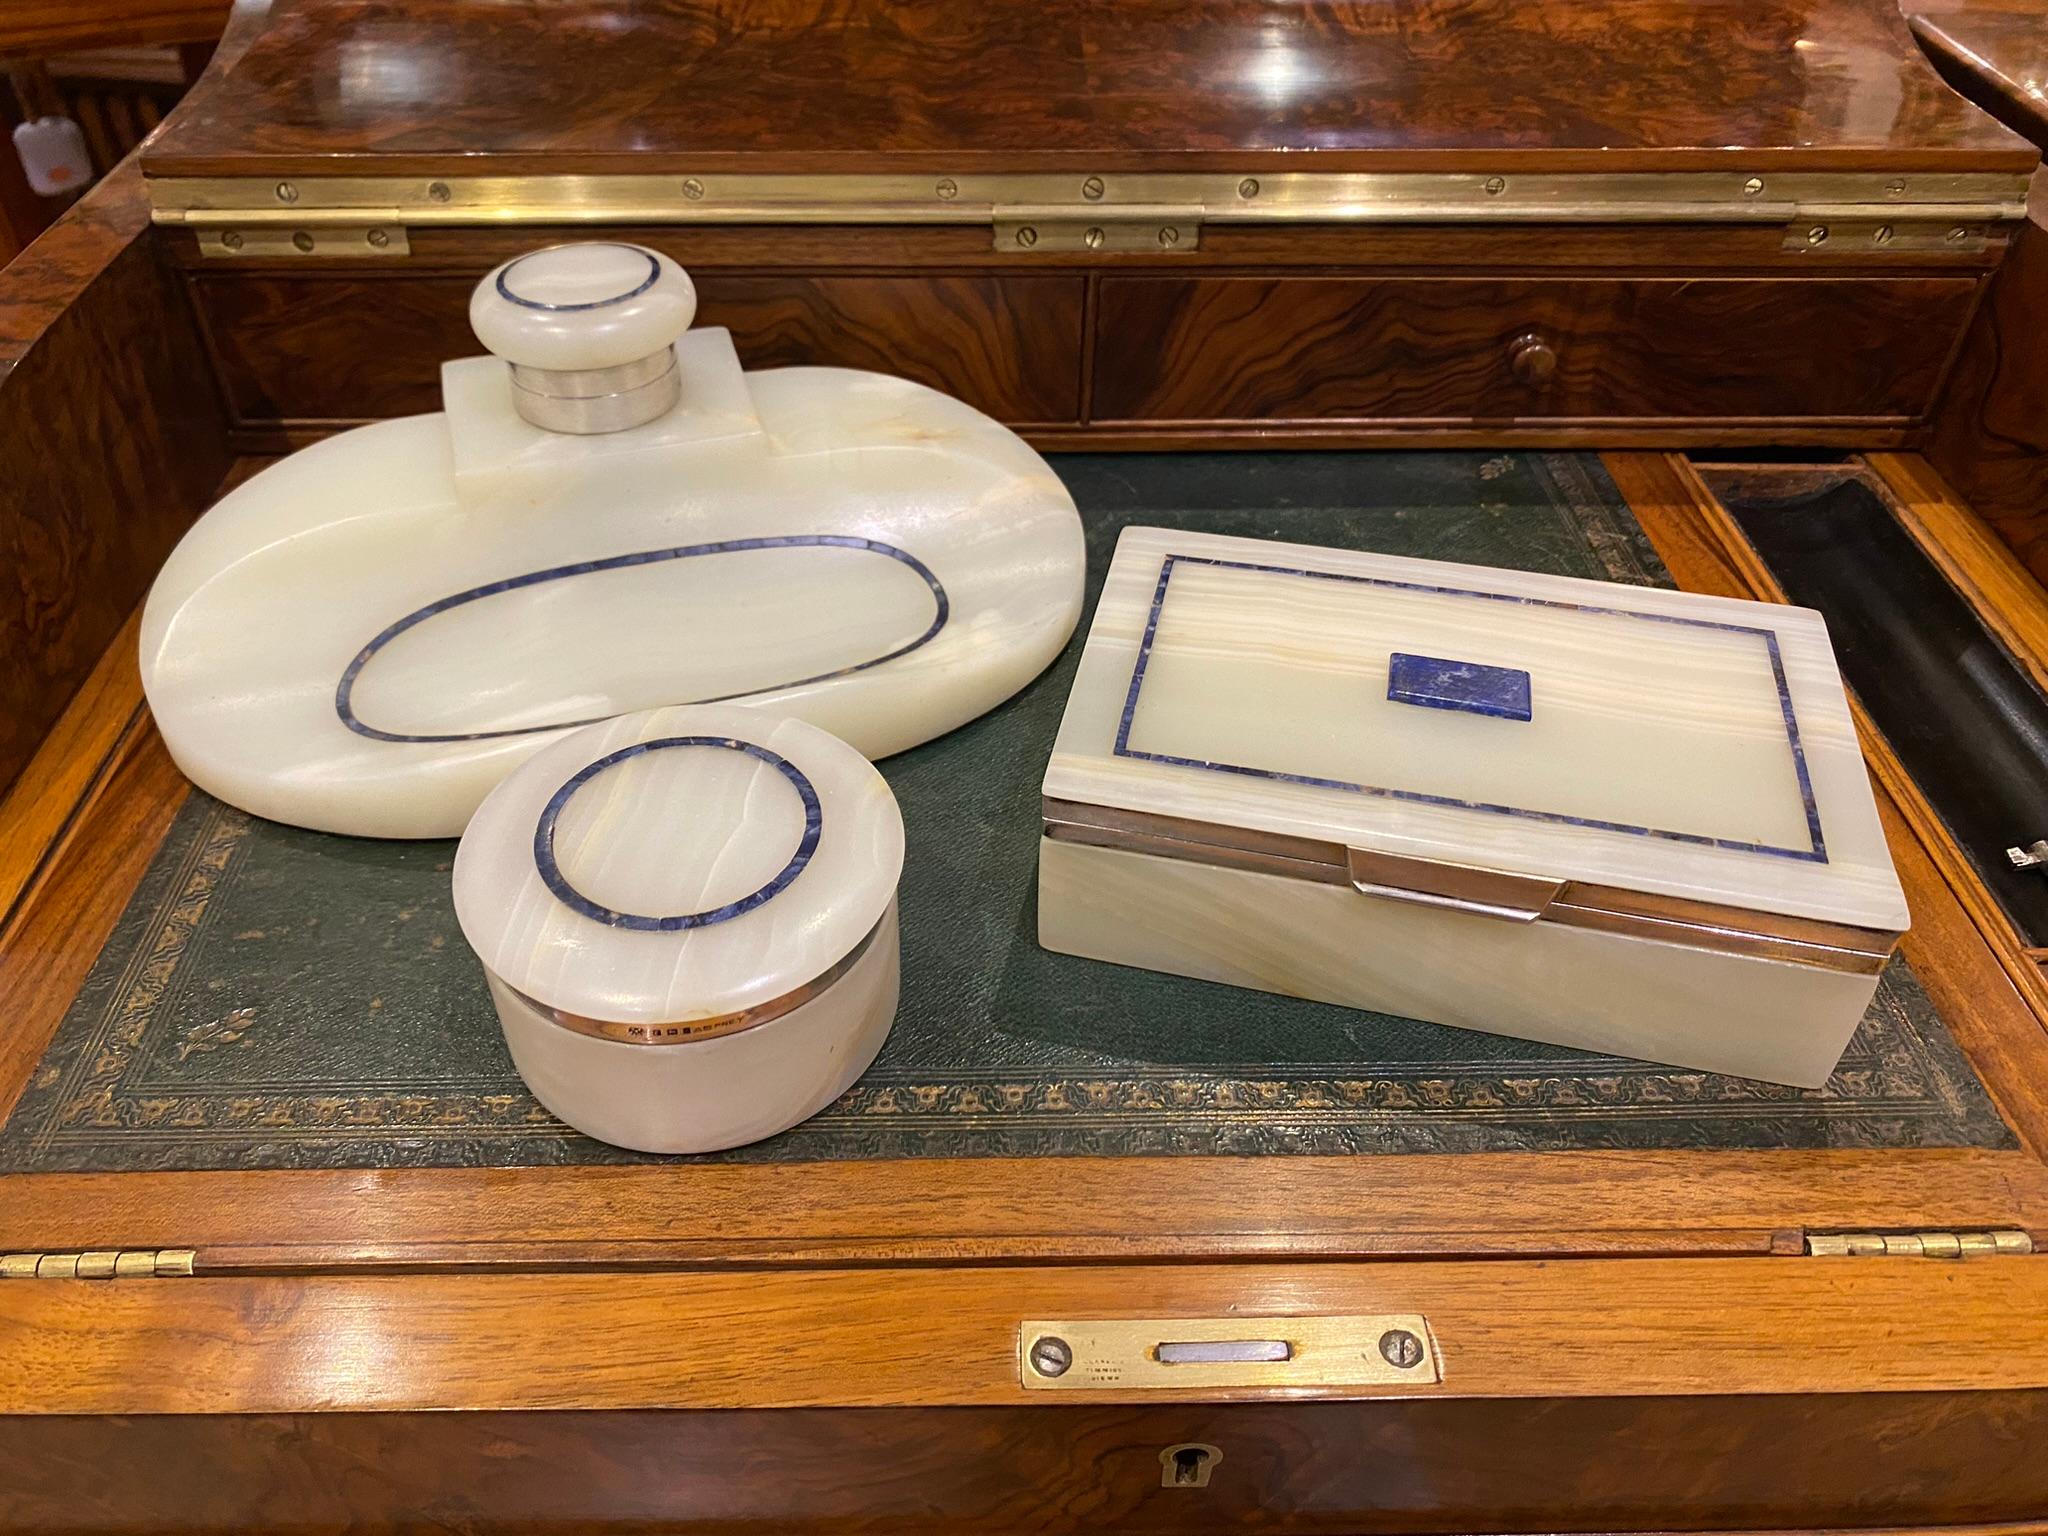 Art Deco Onyx, Lapis & Silver Desk Set, By George Betjemann for Aspreys, London, 1921

This beautiful and rare Onyx and Lapis Lazuli desk set is a luxurious ensemble by George Betjemann & Sons, retailed by Aspreys. Crafted from exquisite onyx,